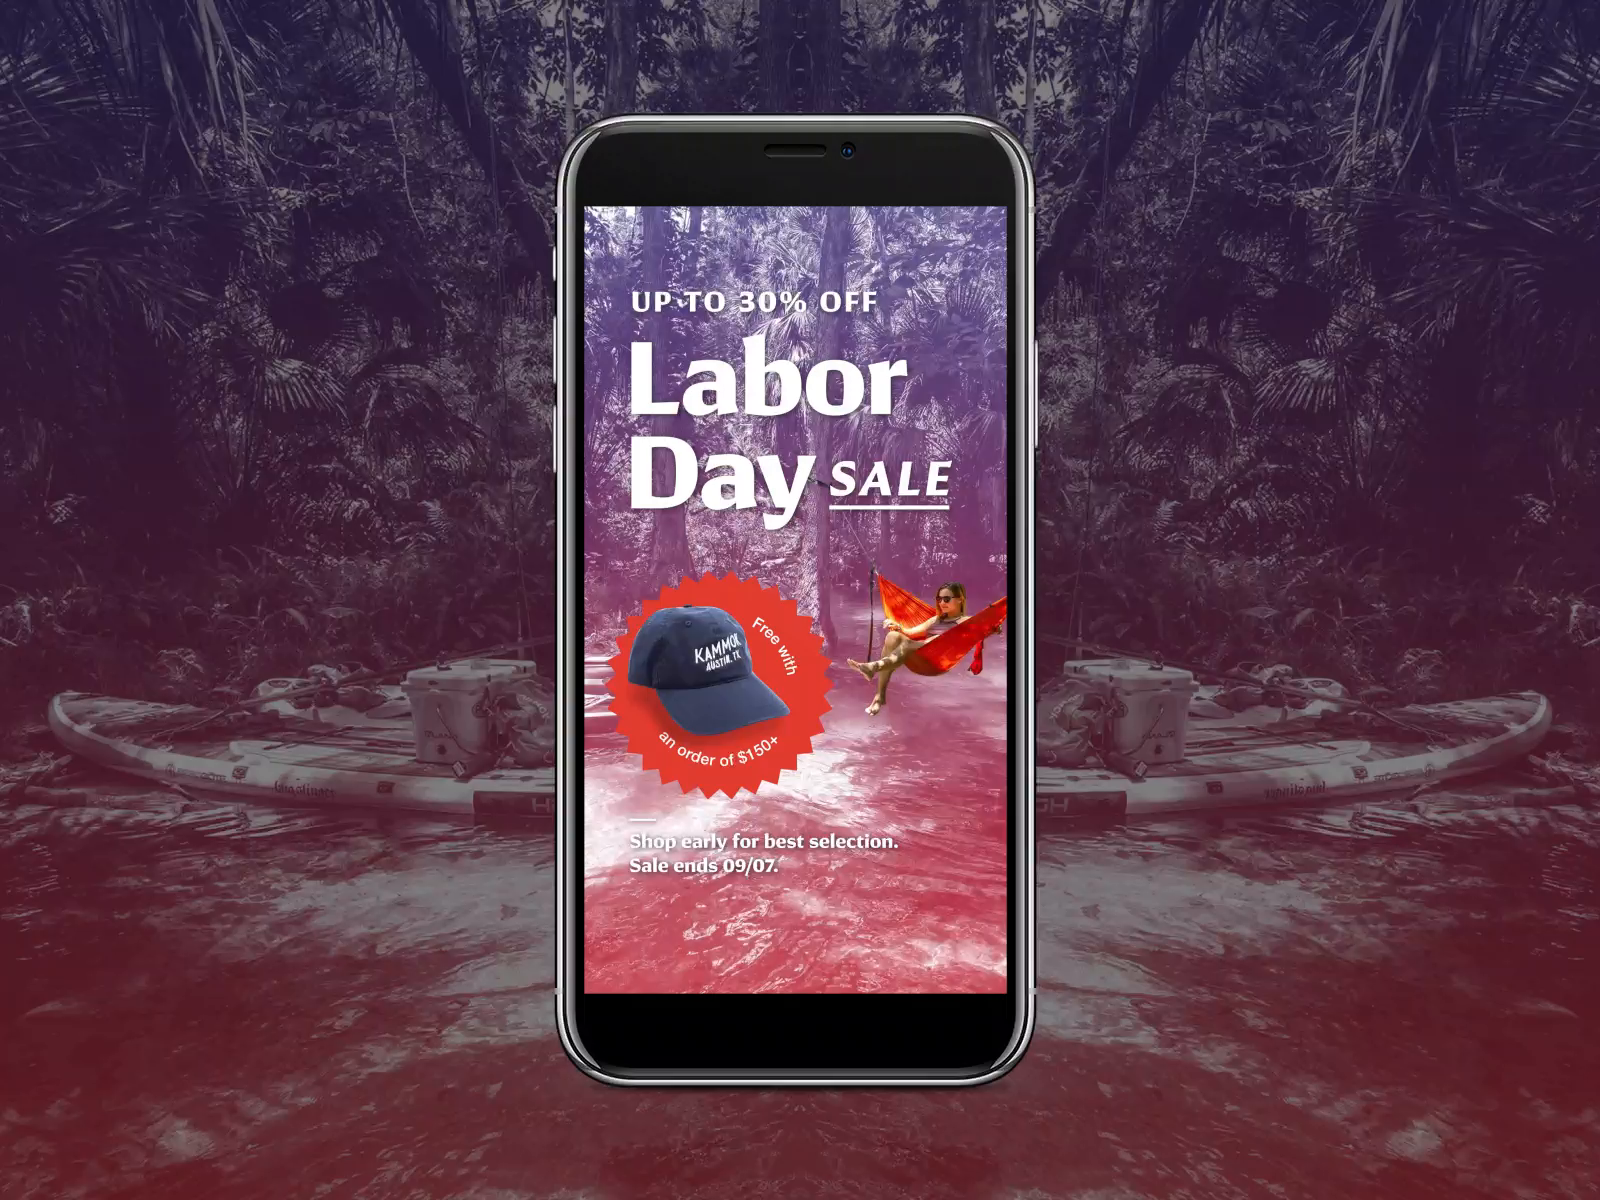 Labor Day Sale 2021 by Alex Bartlett on Dribbble